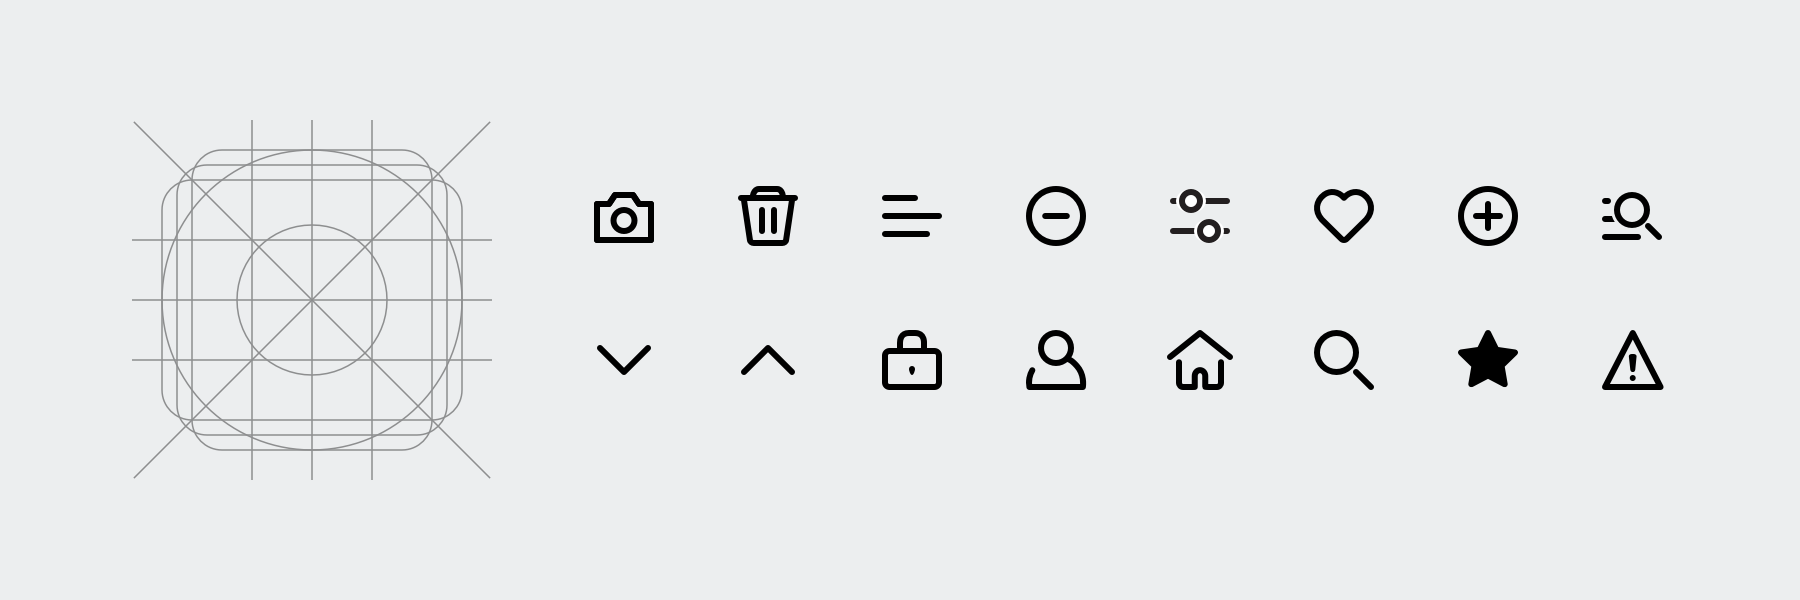 System icons